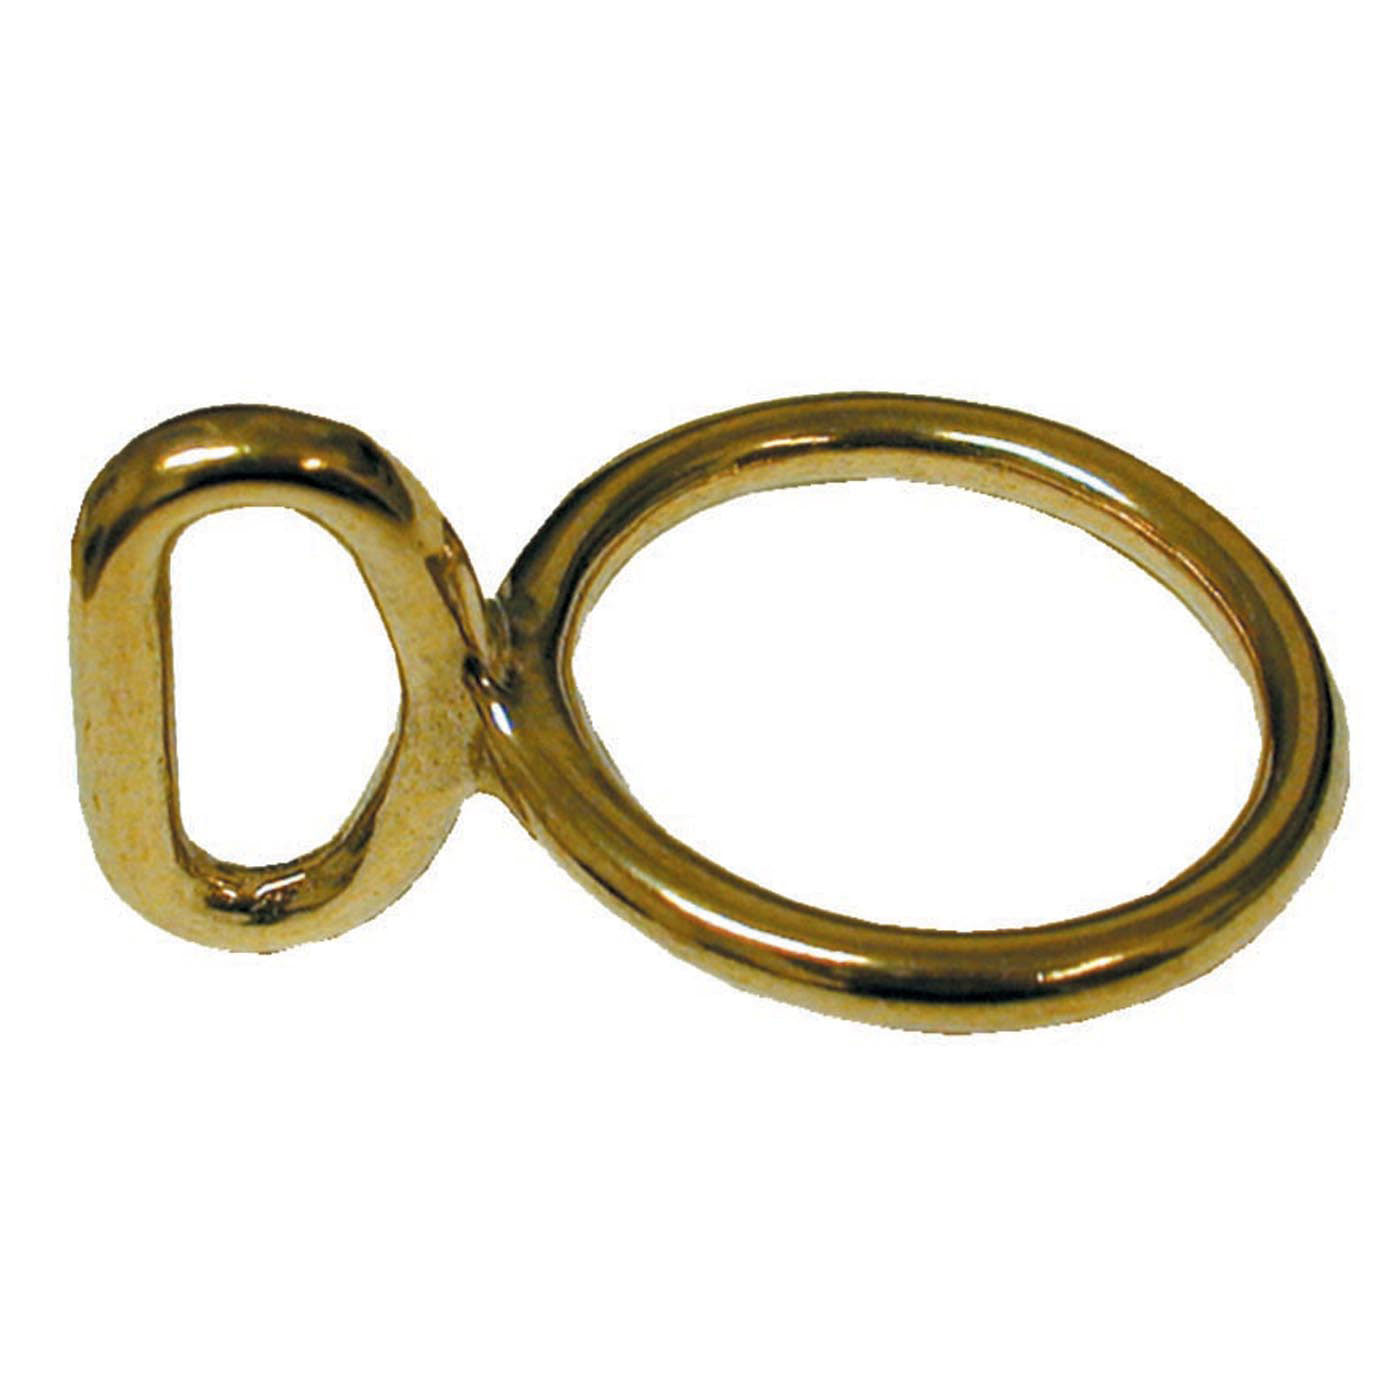 #3611 Solid Brass Loop & Ring 1" x 1-3/8" special order